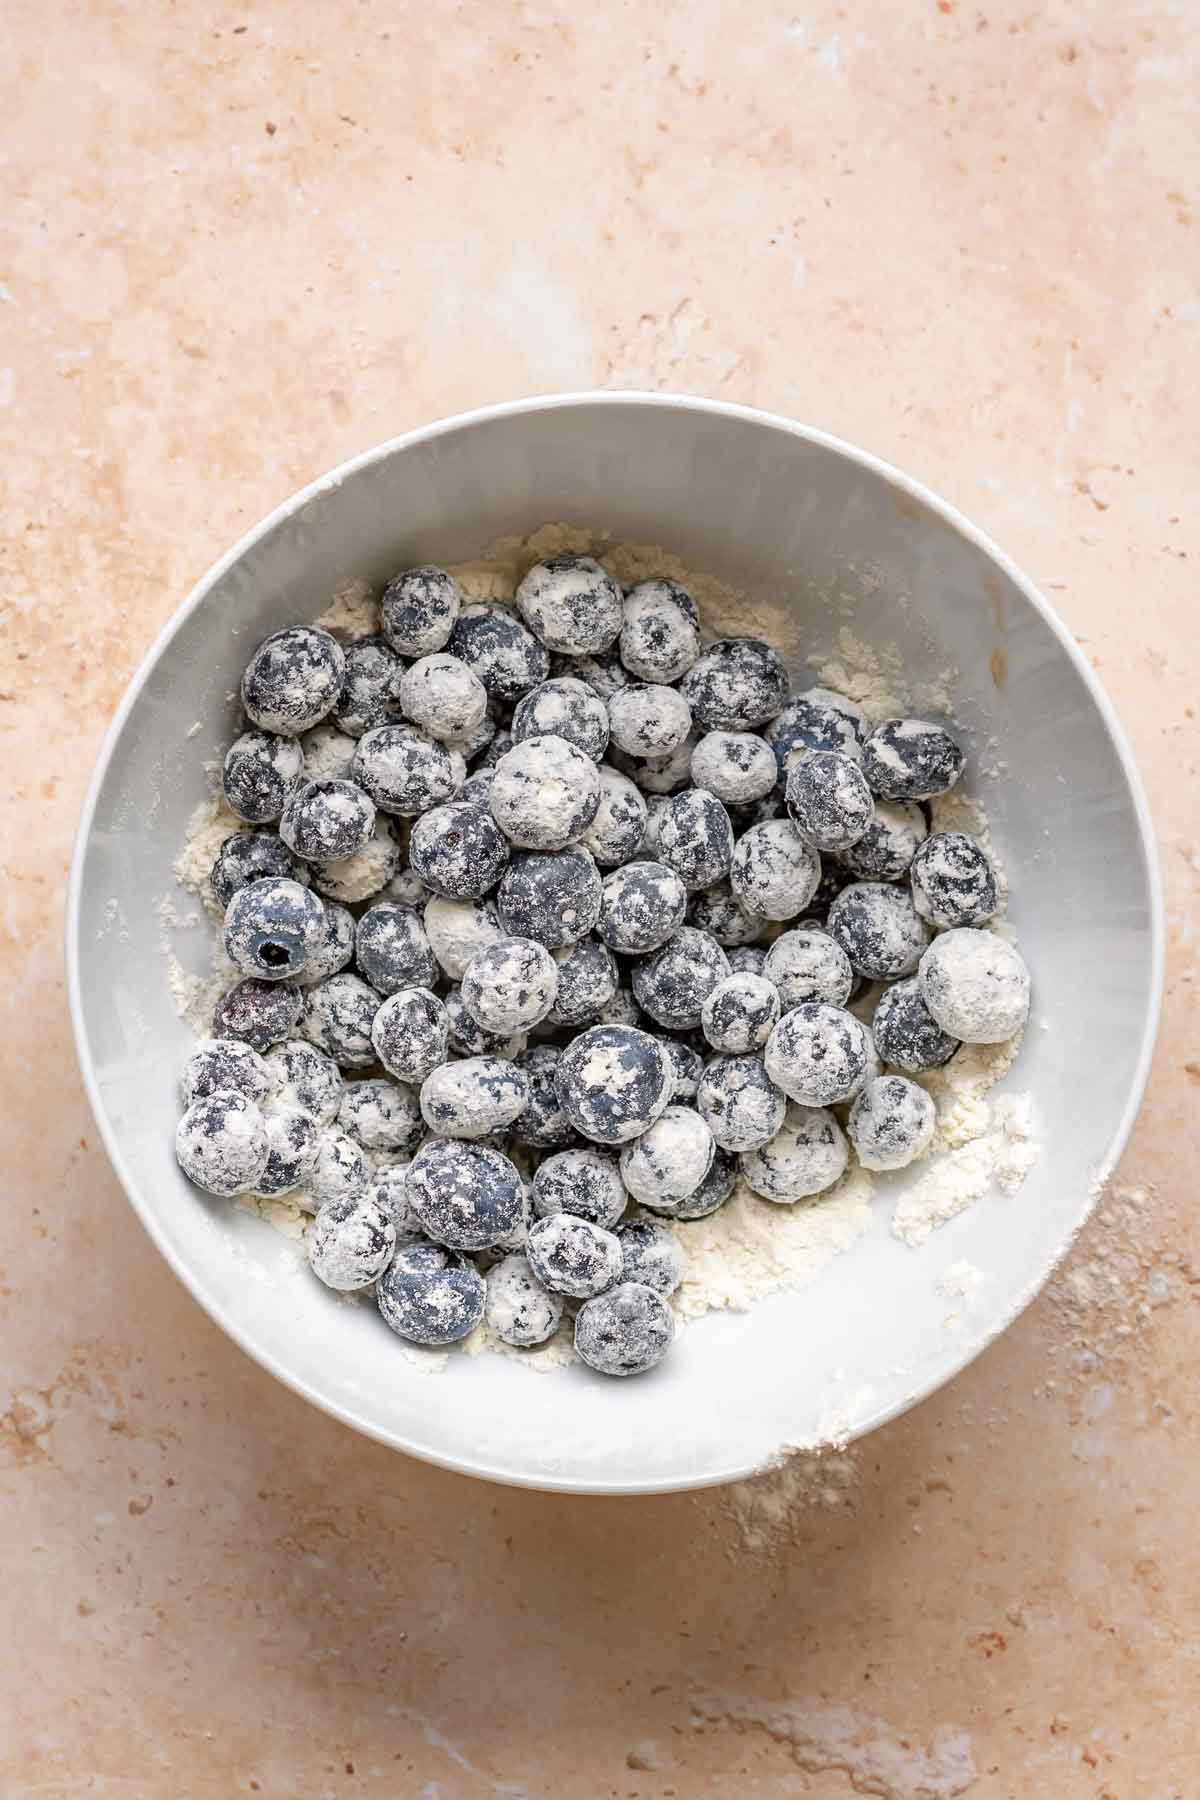 Blueberries coated in flour in a bowl.